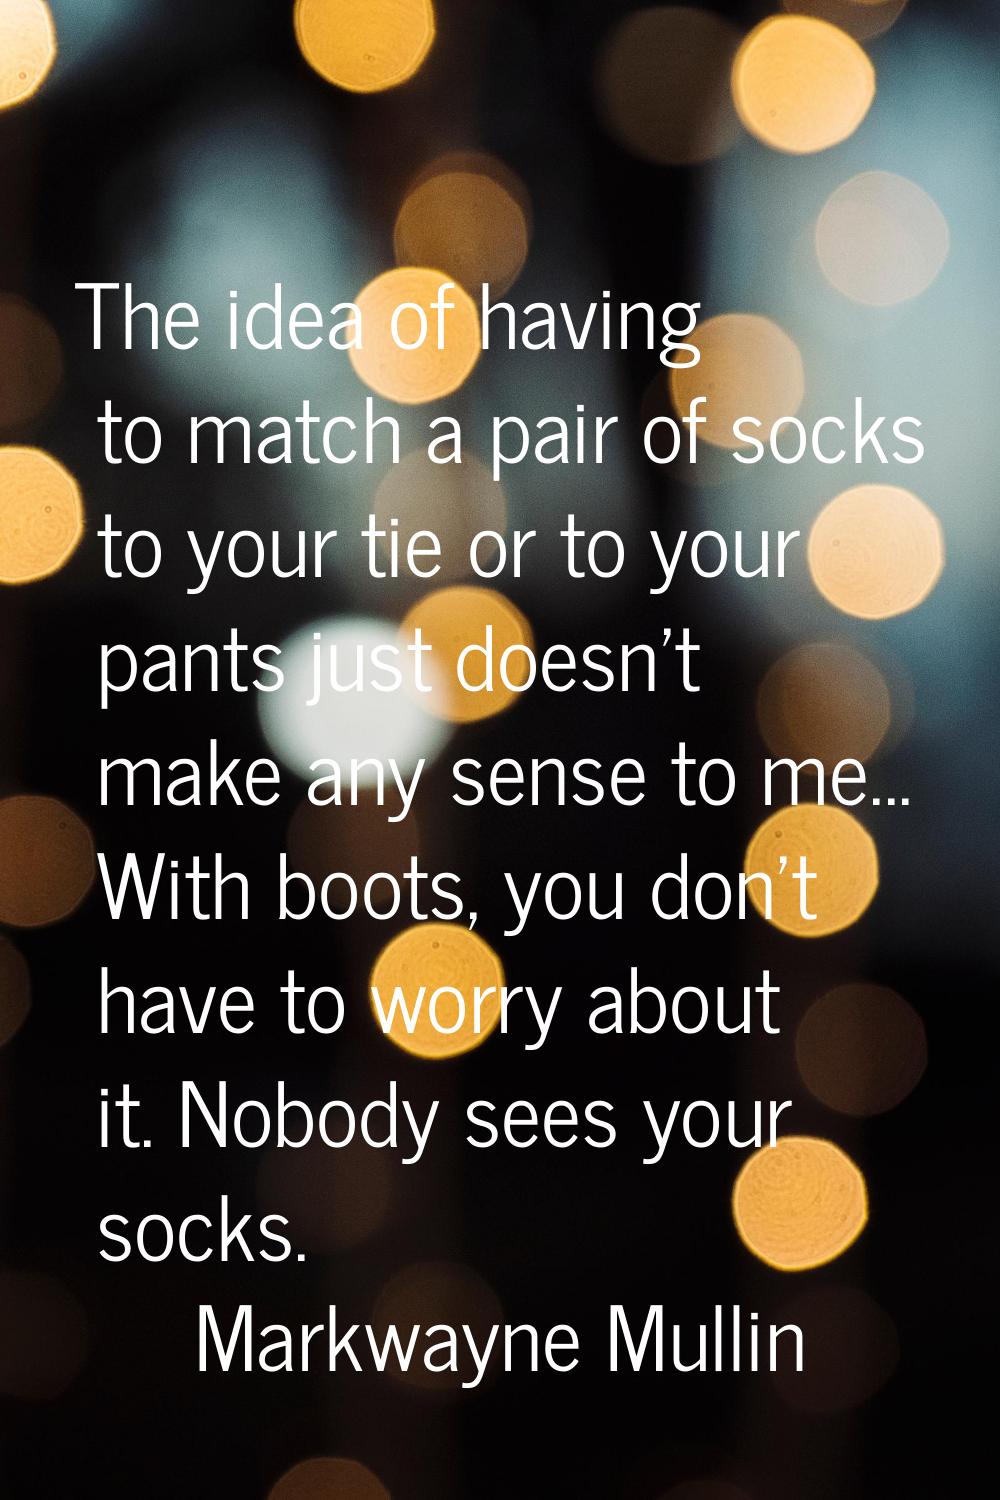 The idea of having to match a pair of socks to your tie or to your pants just doesn't make any sens